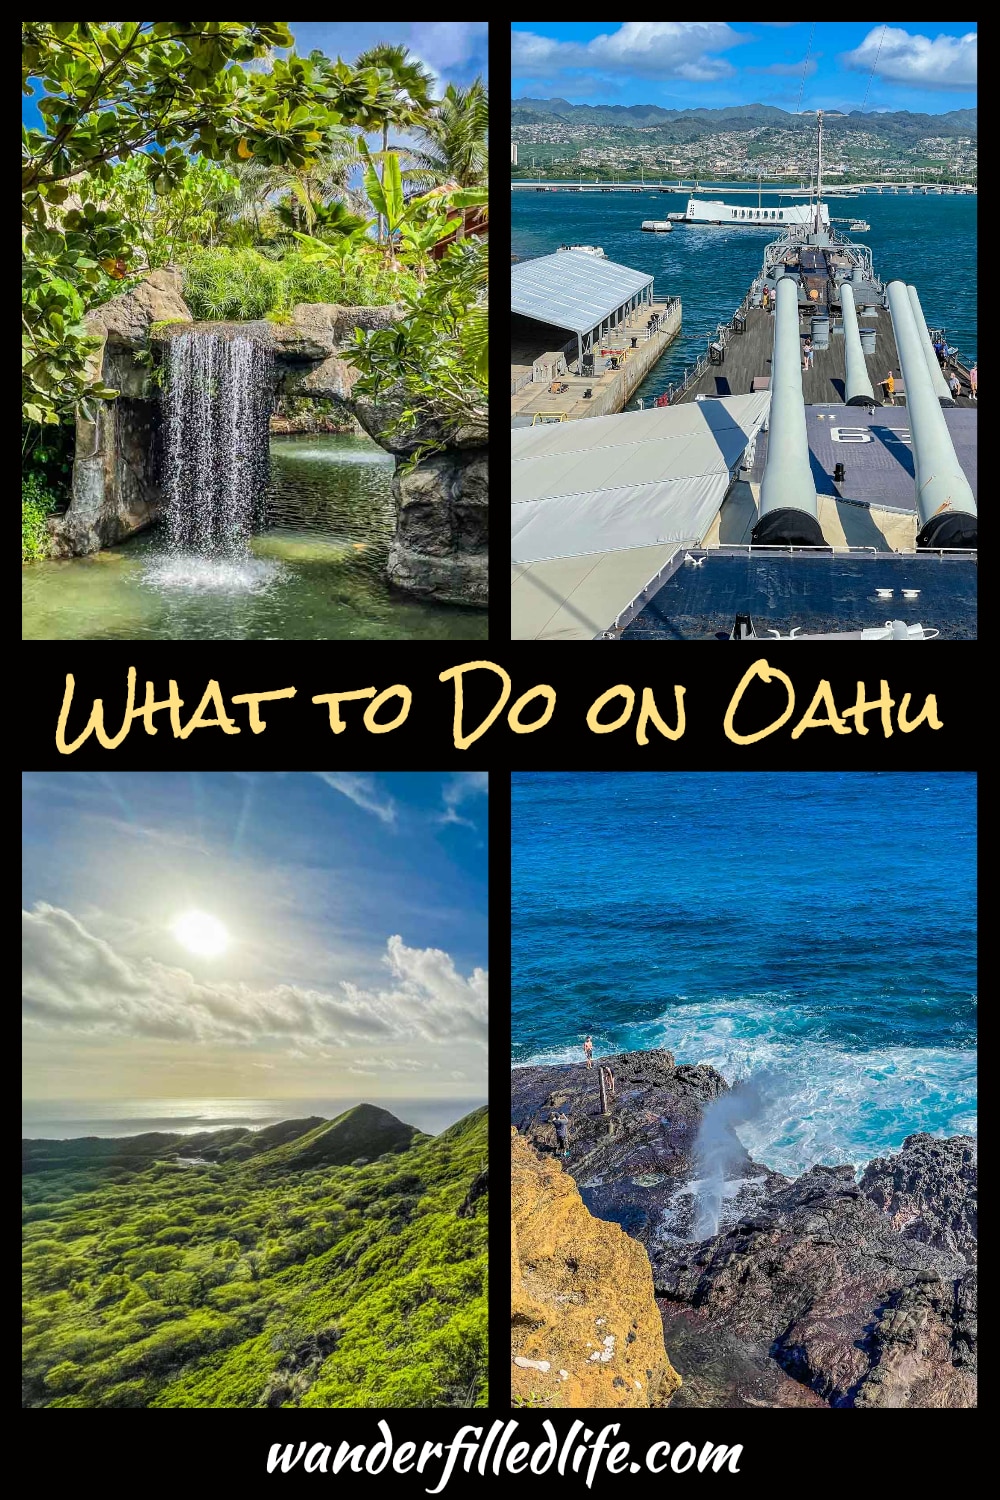 Headed to Honolulu, Hawaii and trying to figure out what to do? Check out our roundup of the best places to go on Oahu.